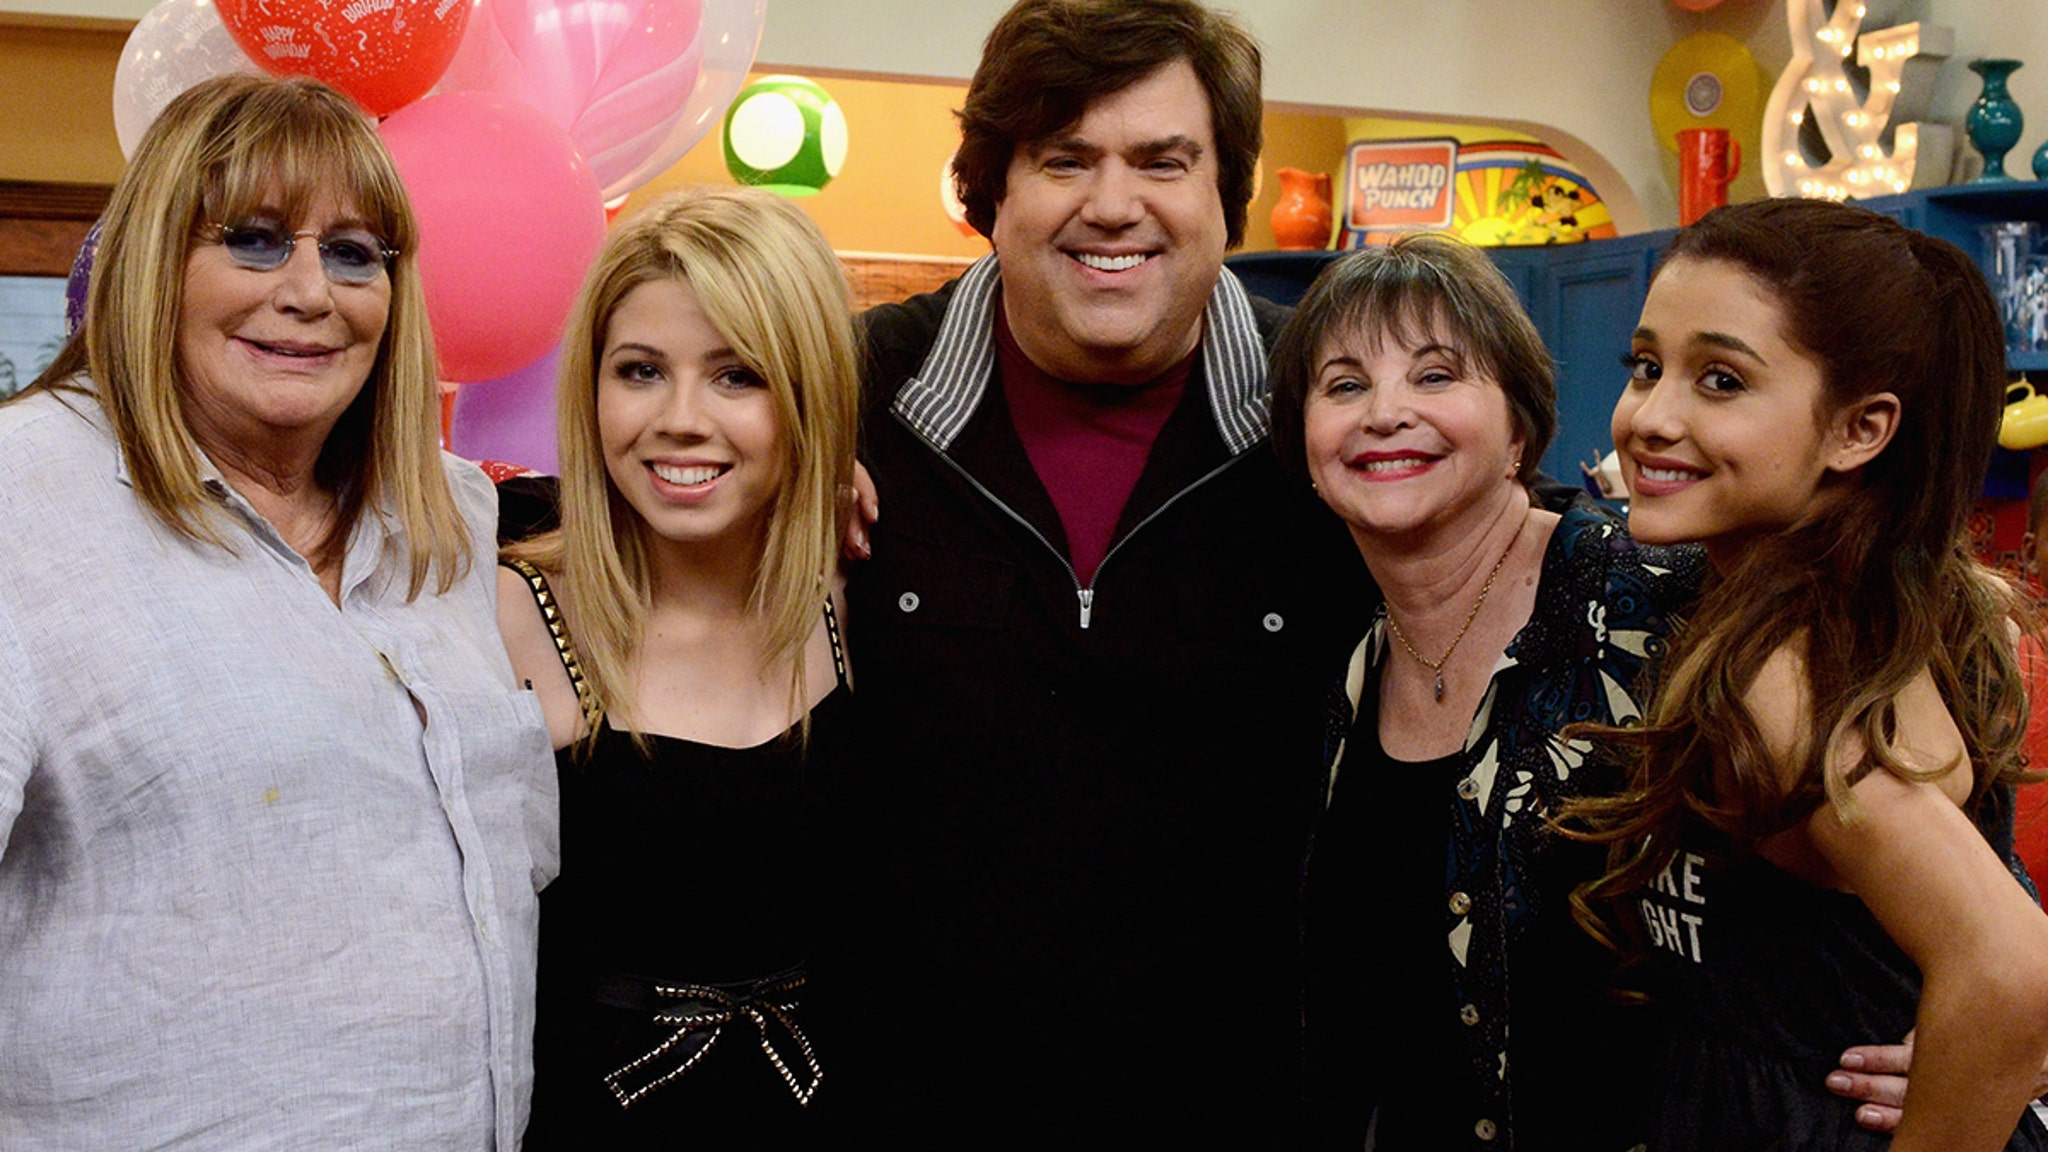 Dan Schneider Denies 'Sexualizing' Child Stars, Colleague Says He Was a 'F--king A--hole'